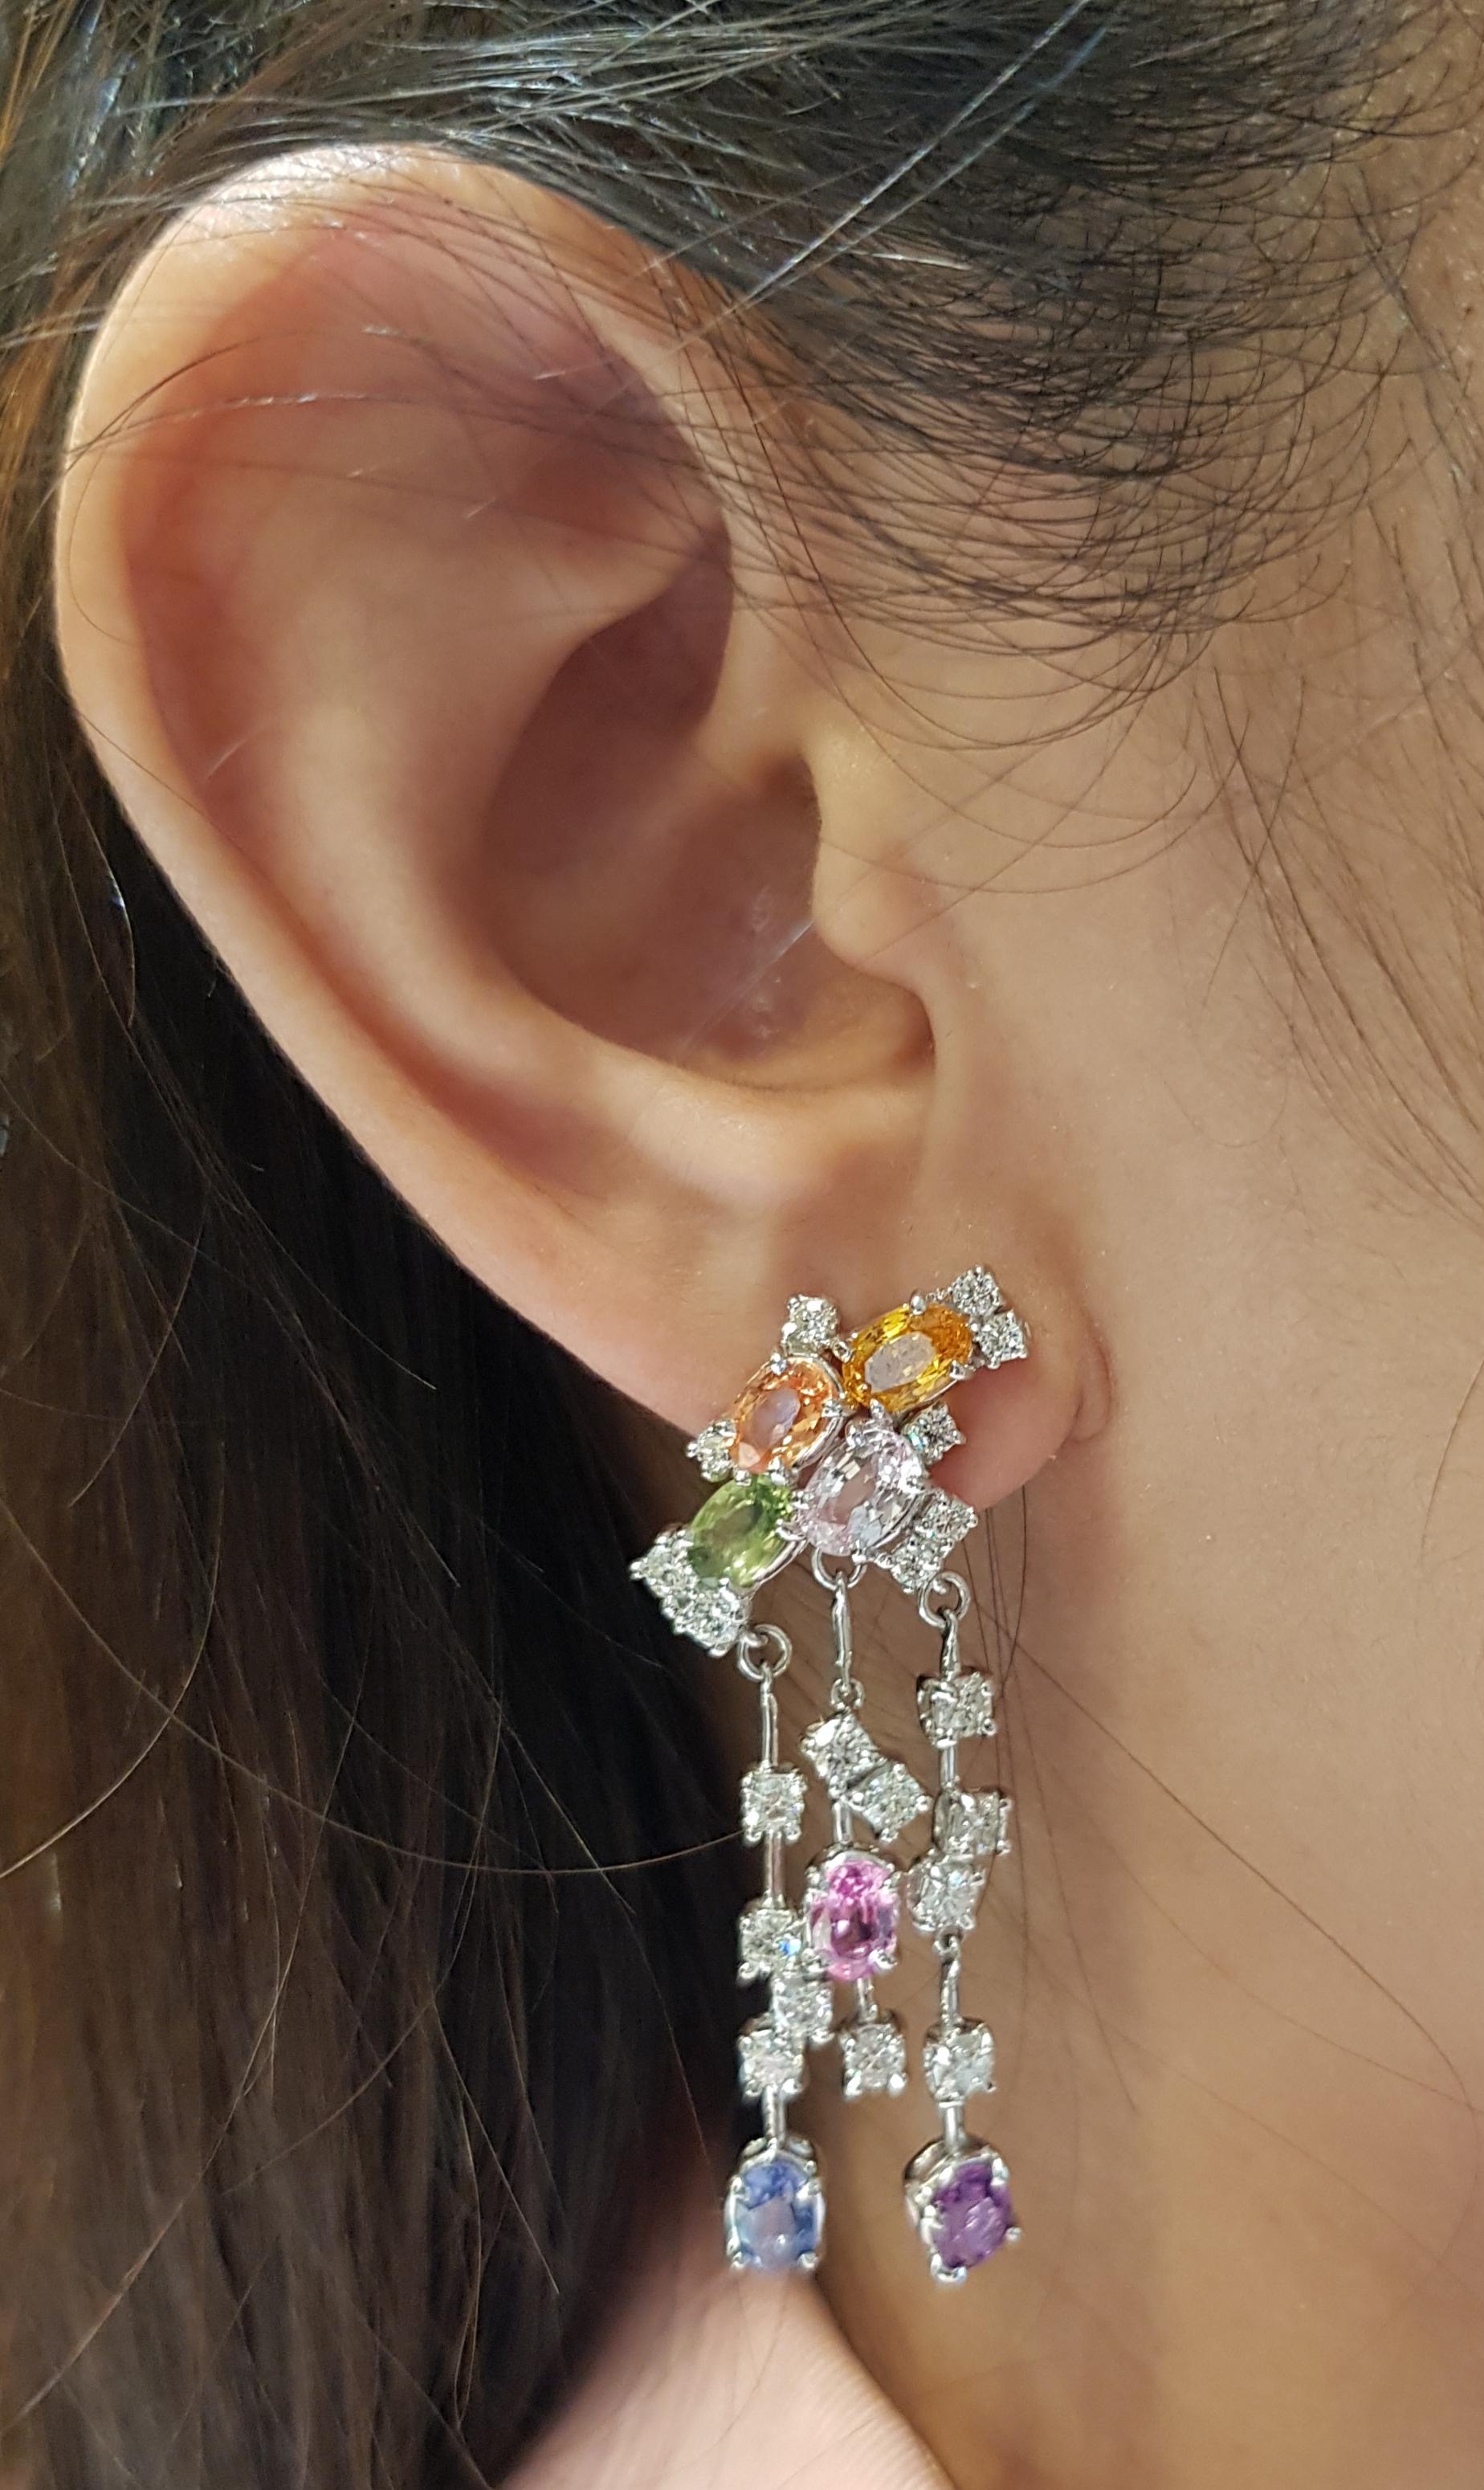 Rainbow Colour Sapphire 8.37 carats with Diamond 2.23 carats Earrings set in 18 Karat White Gold Settings

Width:  2.0 cm 
Length:  4.6 cm
Total Weight: 16.85 grams

